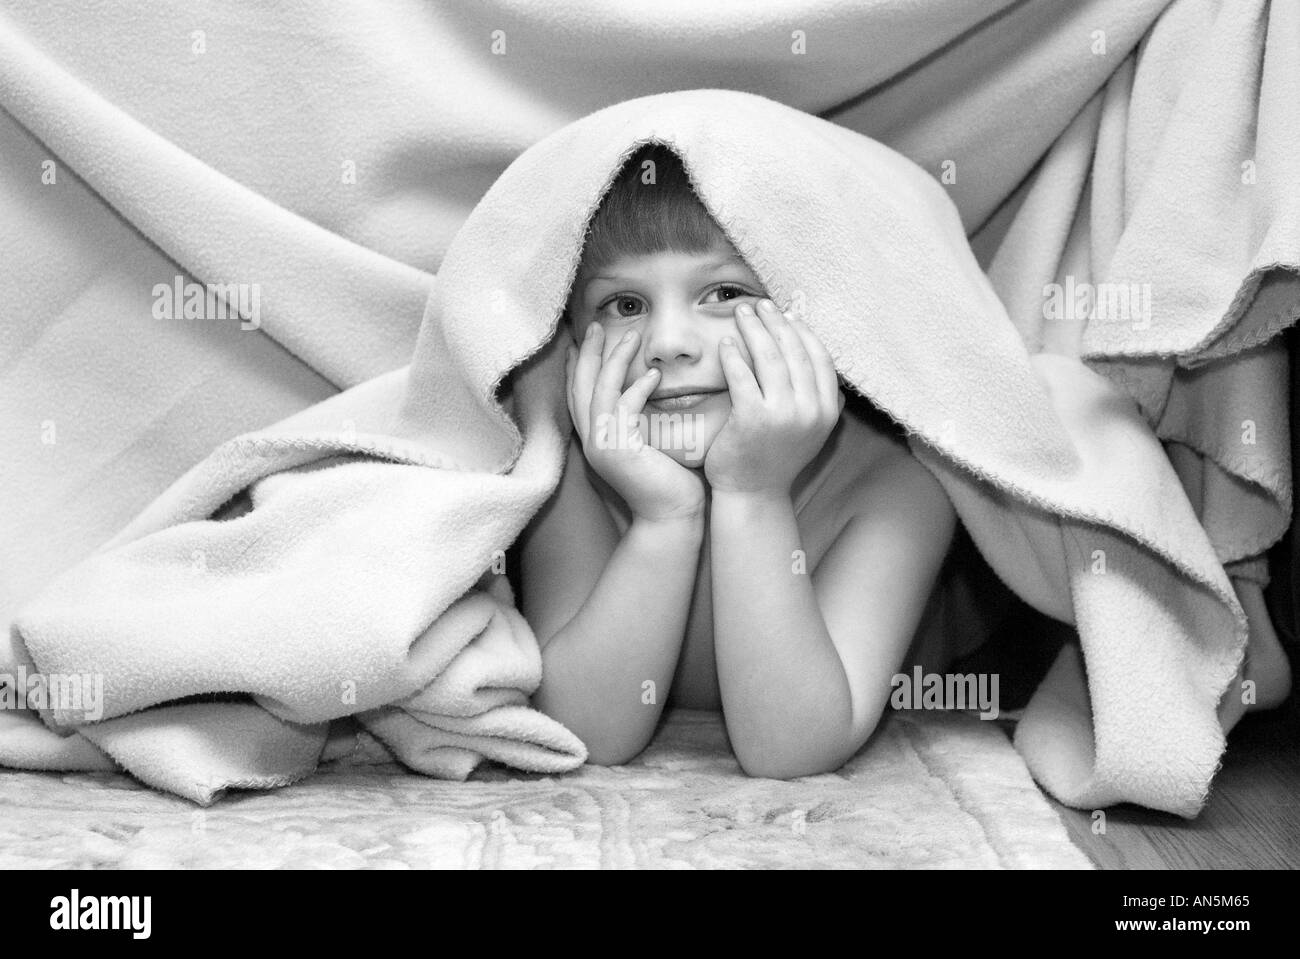 Small boy smiling hiding under blanket Stock Photo